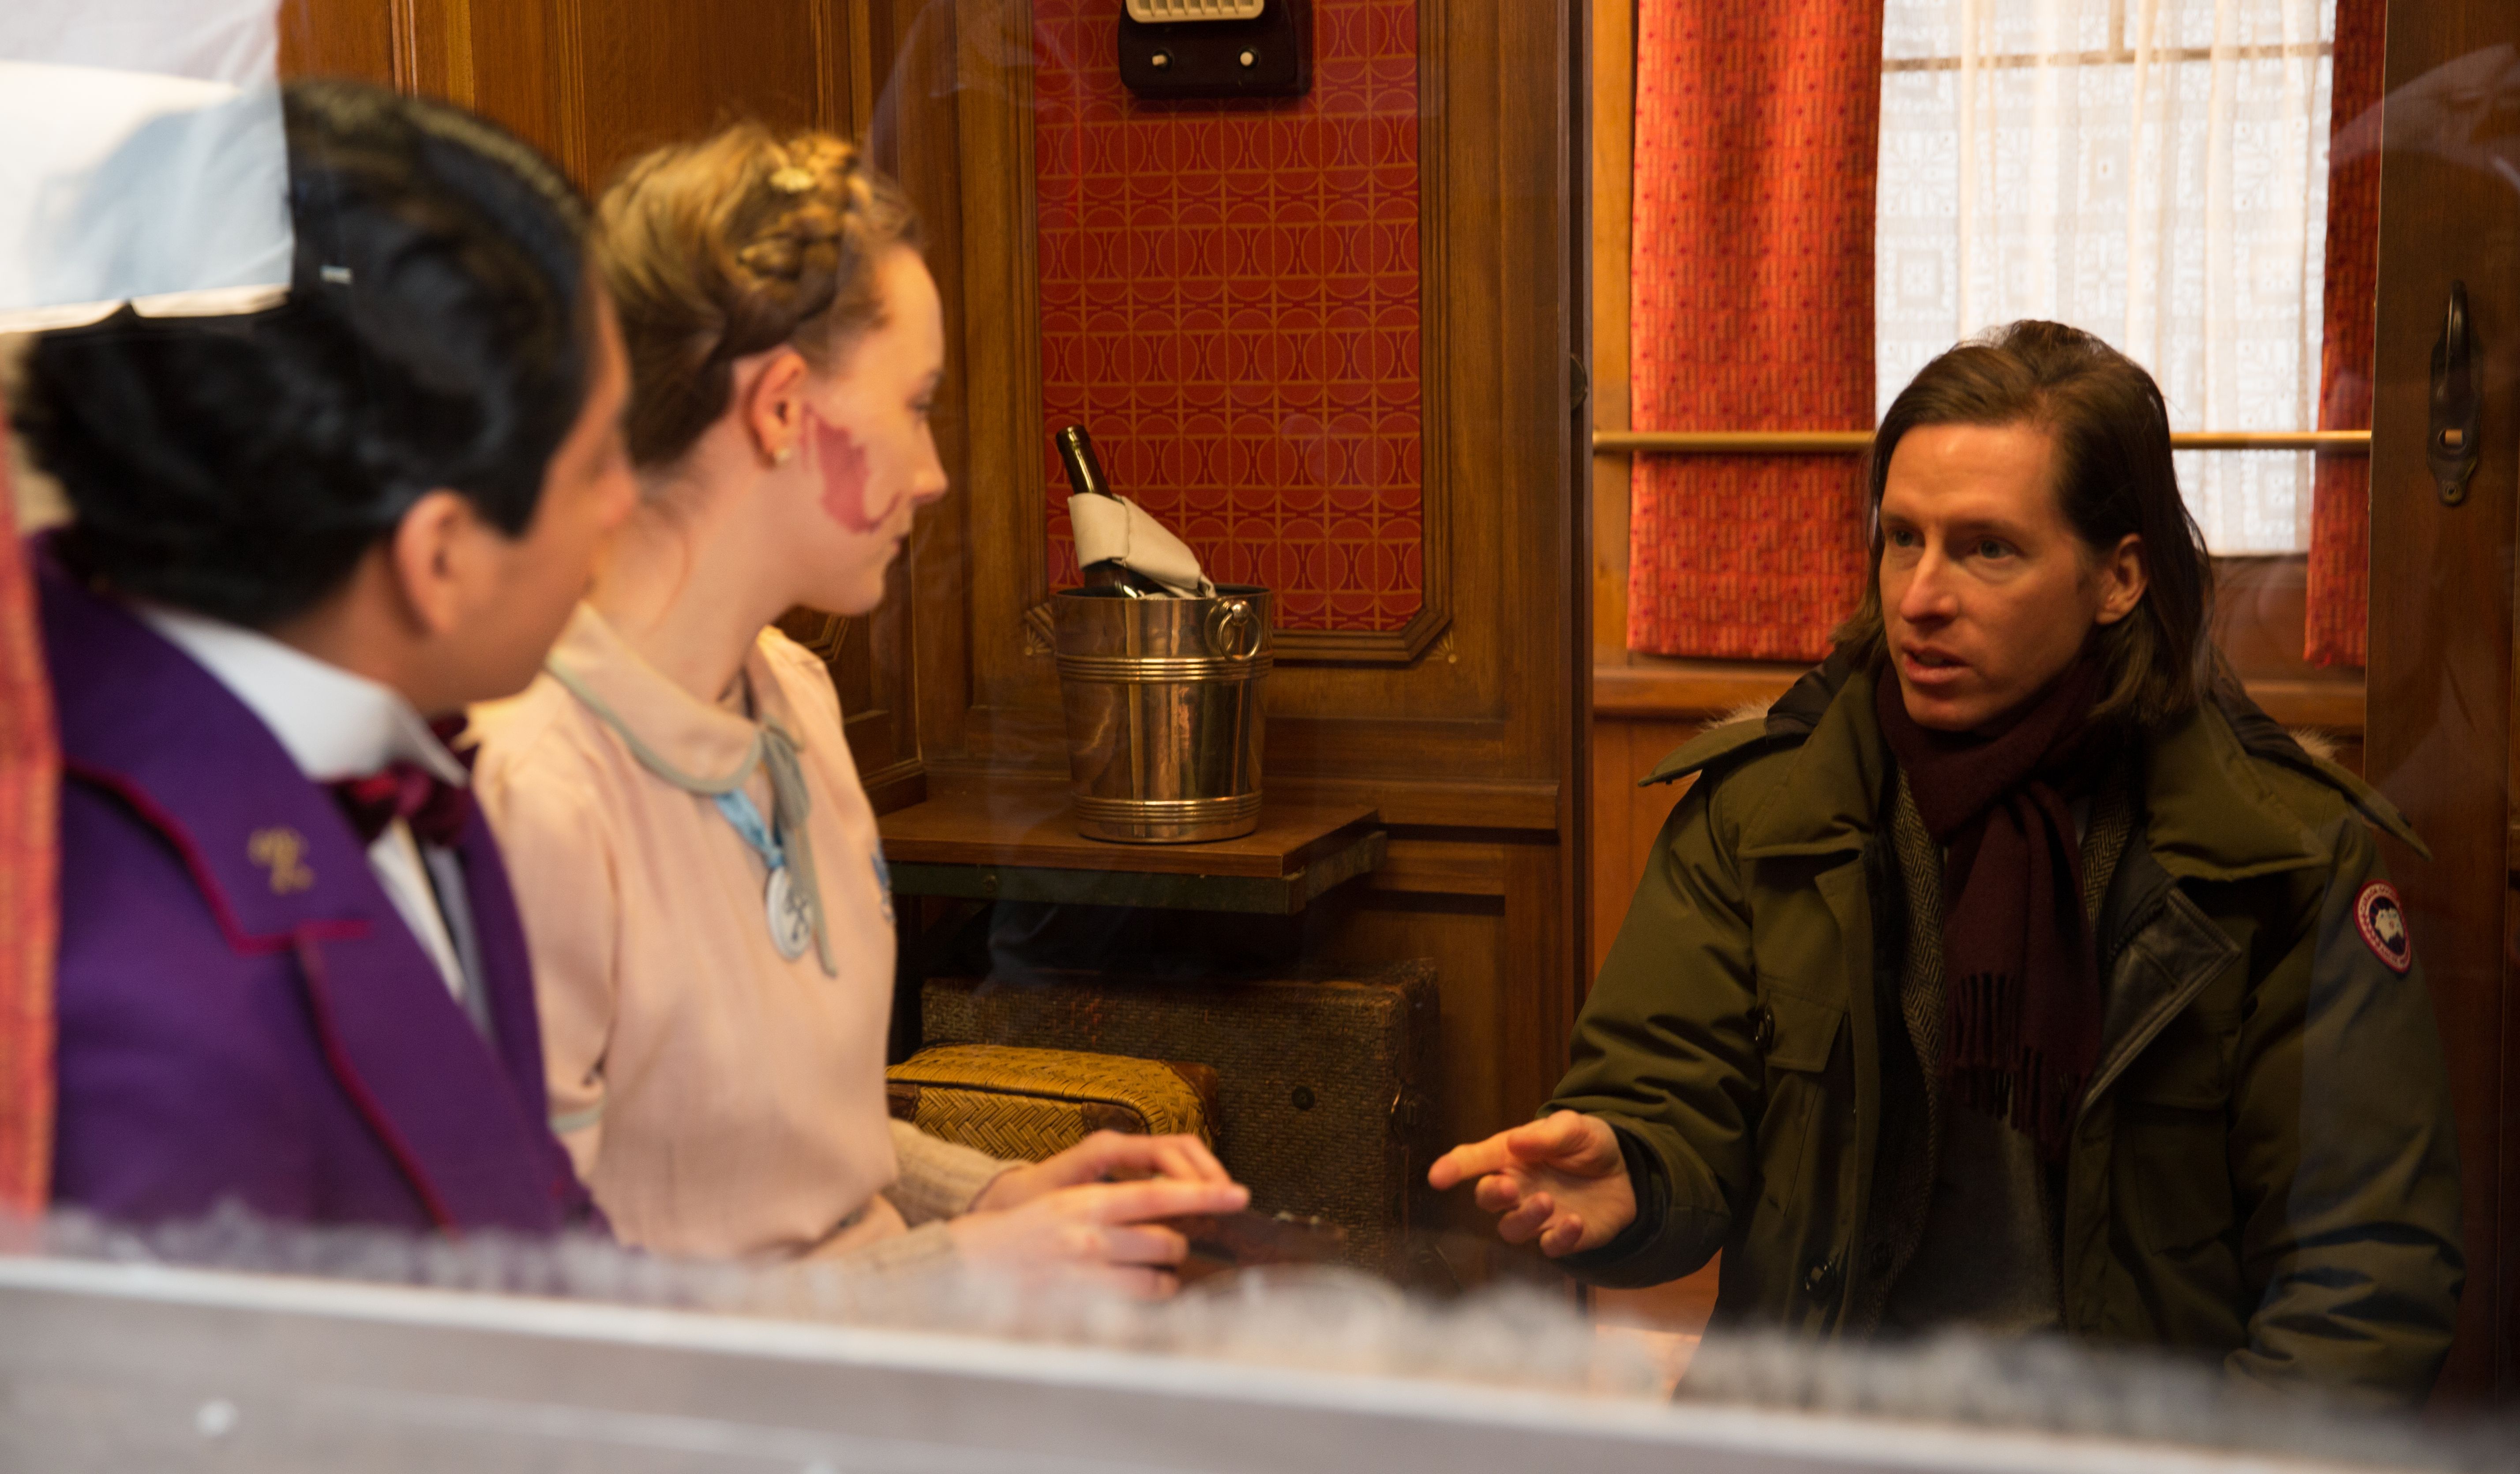 Wes Anderson on set with Saoirse Ronan and Tony Revolori